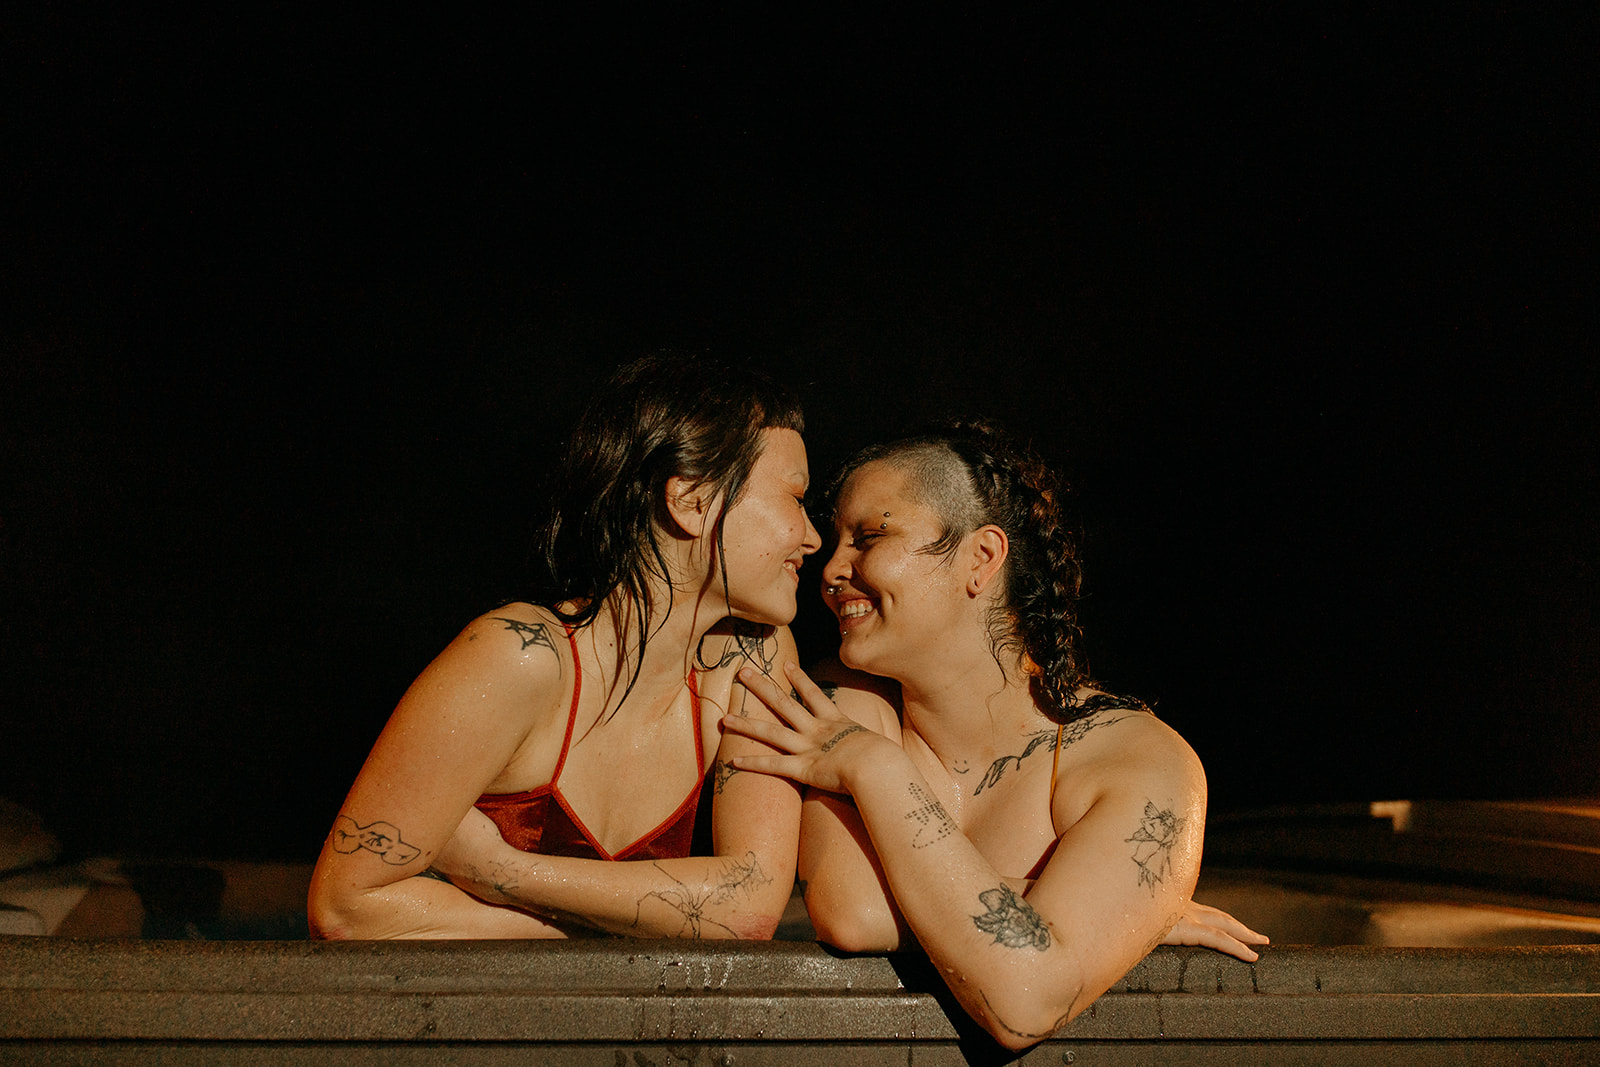 romantic airbnb couples photoshoot in a hot tub